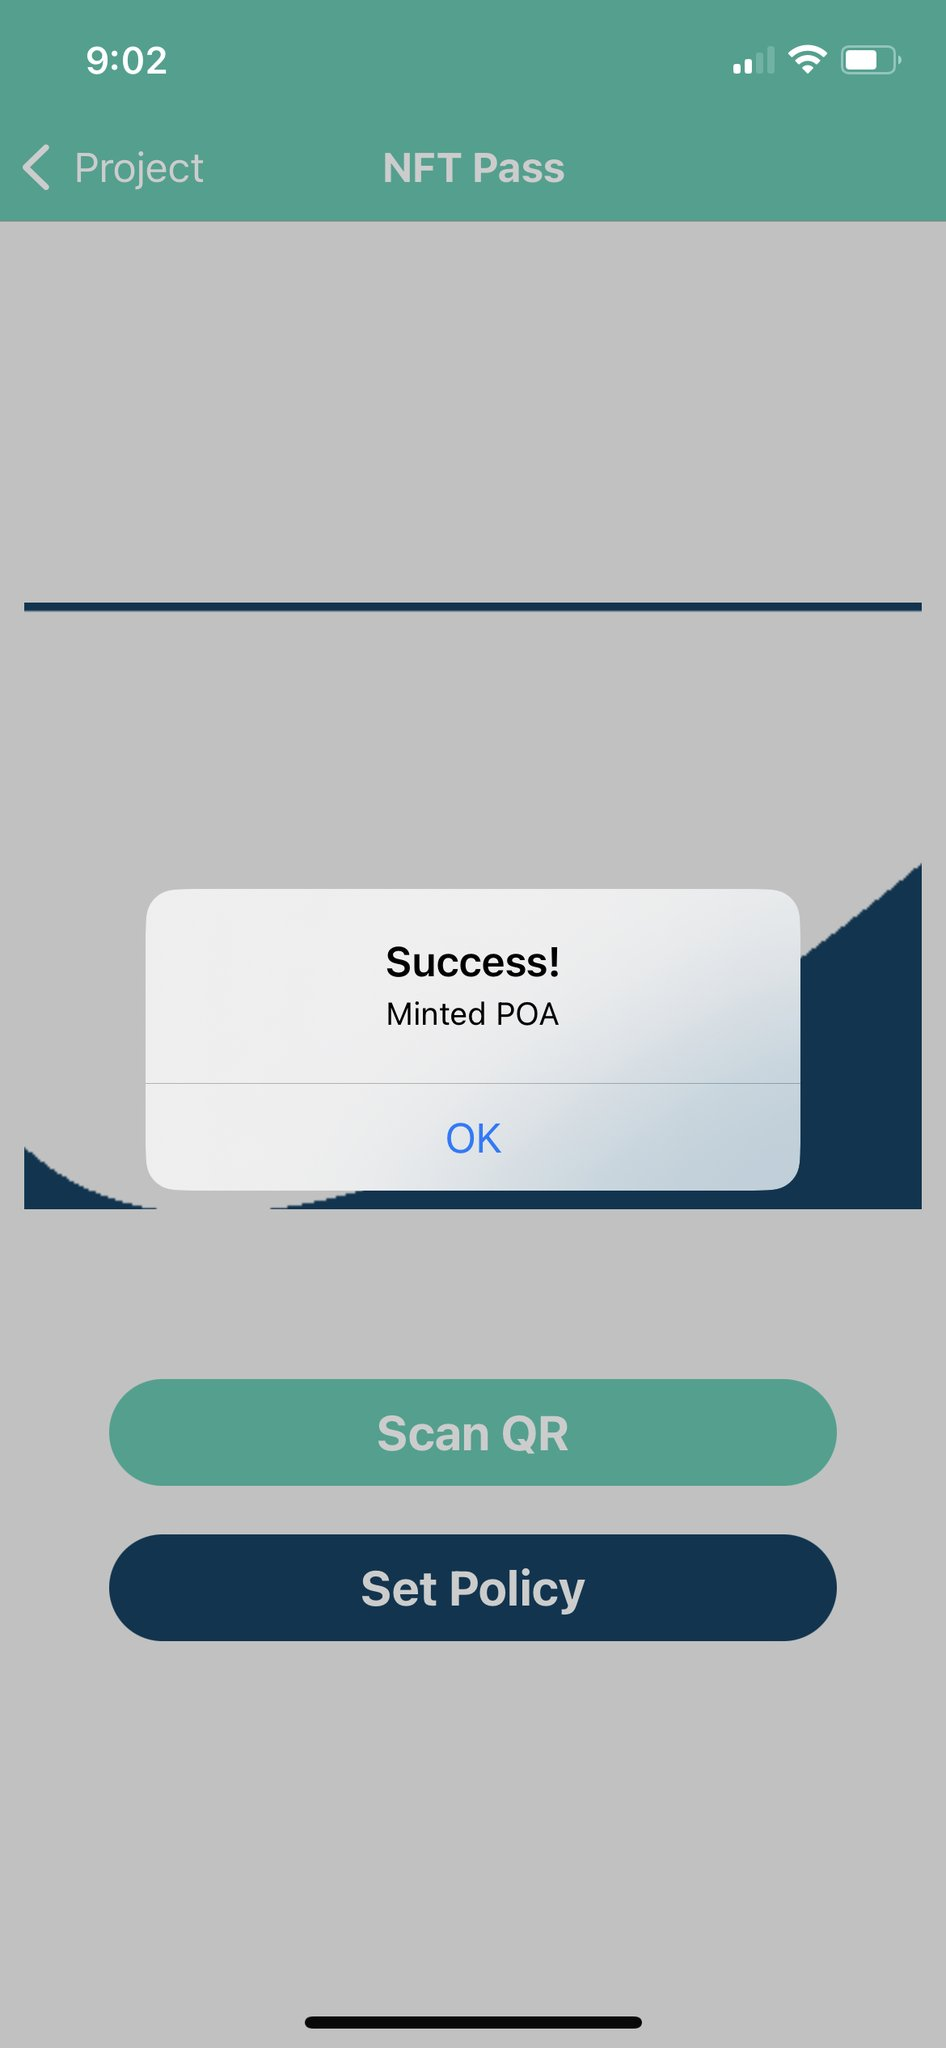 NFTPass App Displaying message "Success! Minted POA"